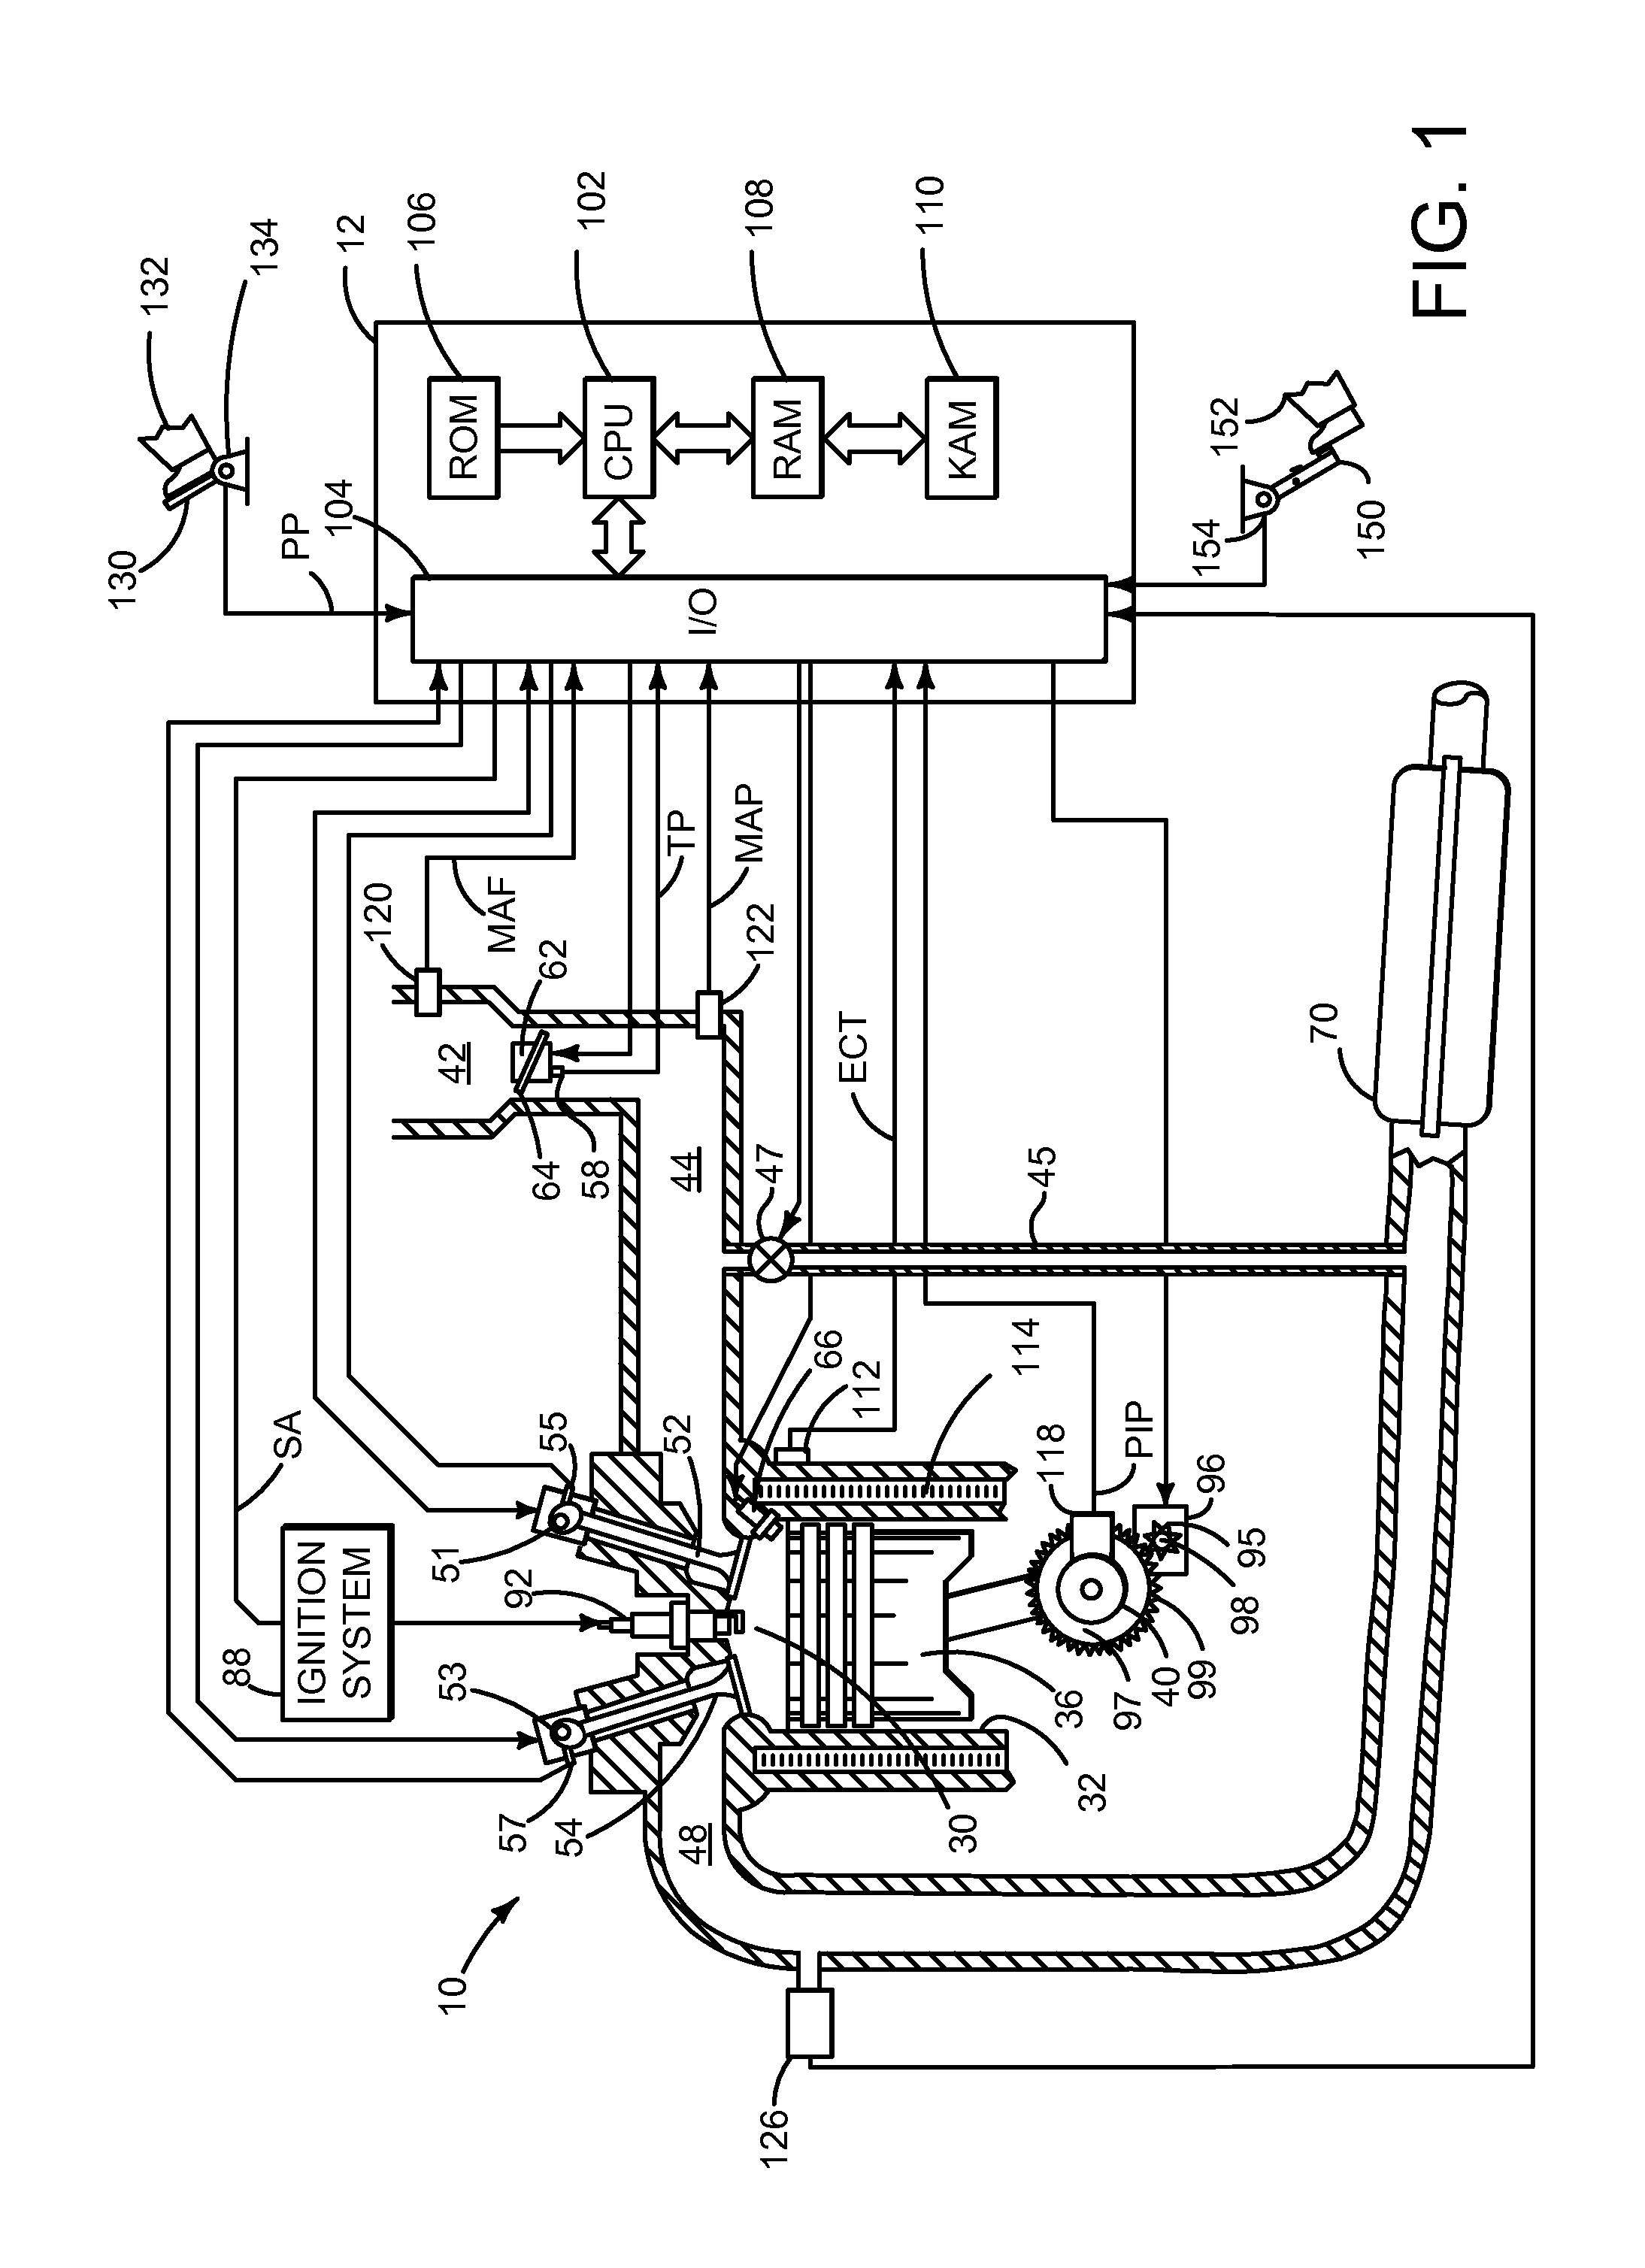 Methods and systems for operating an engine